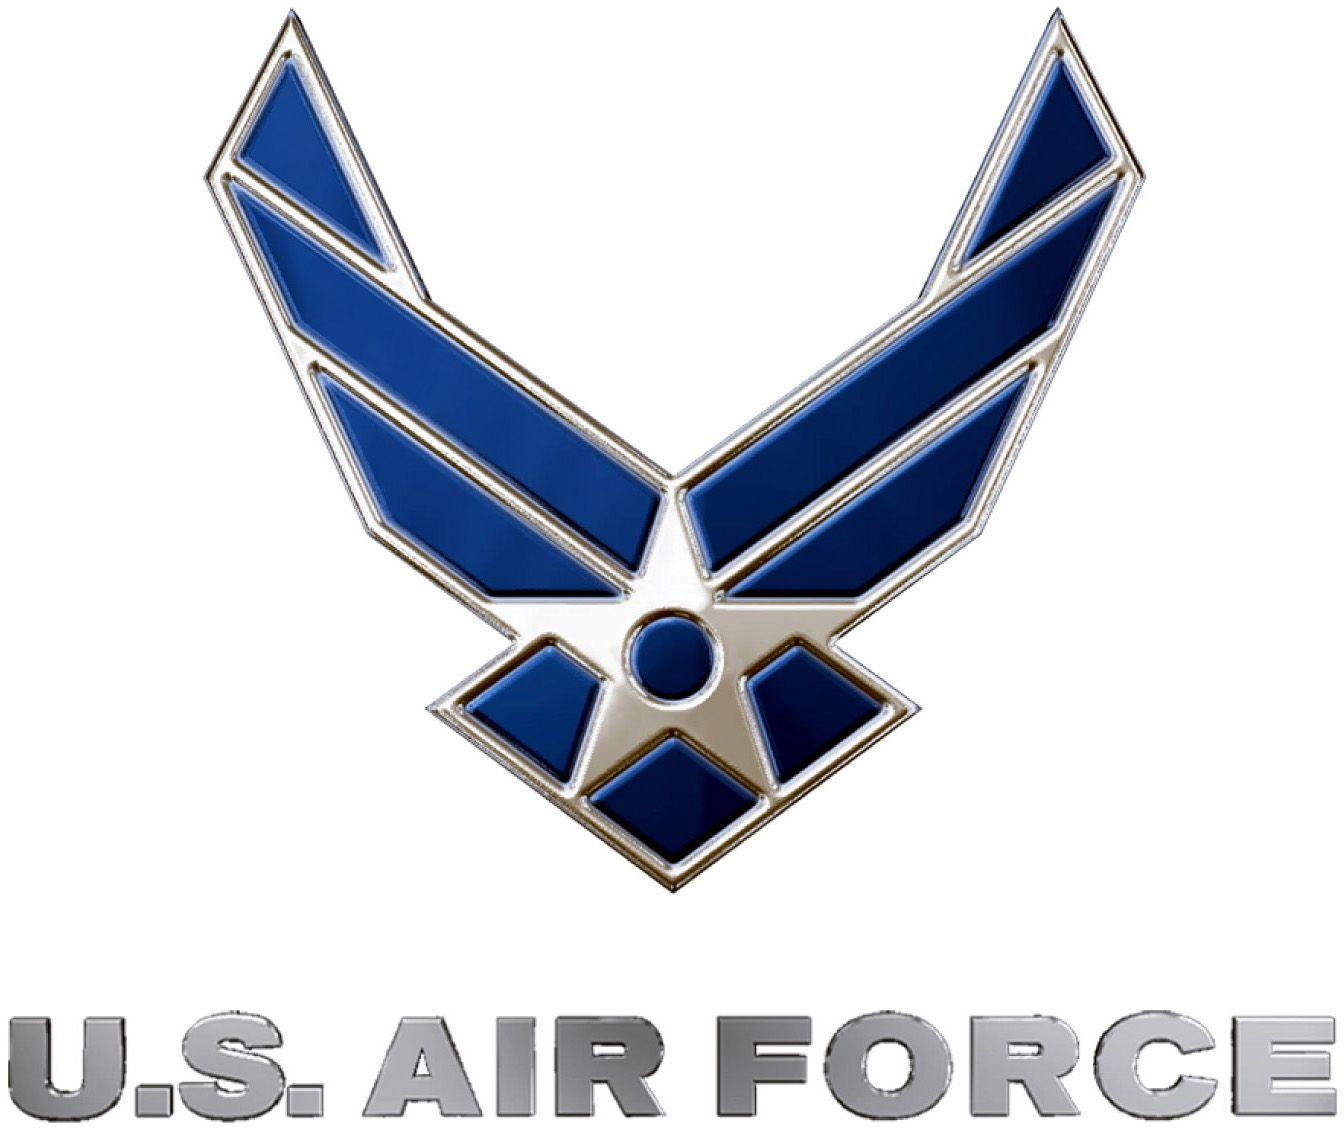 Silver Air Force Logo - File:United States Air Force logo, blue and silver.jpg - Wikimedia ...